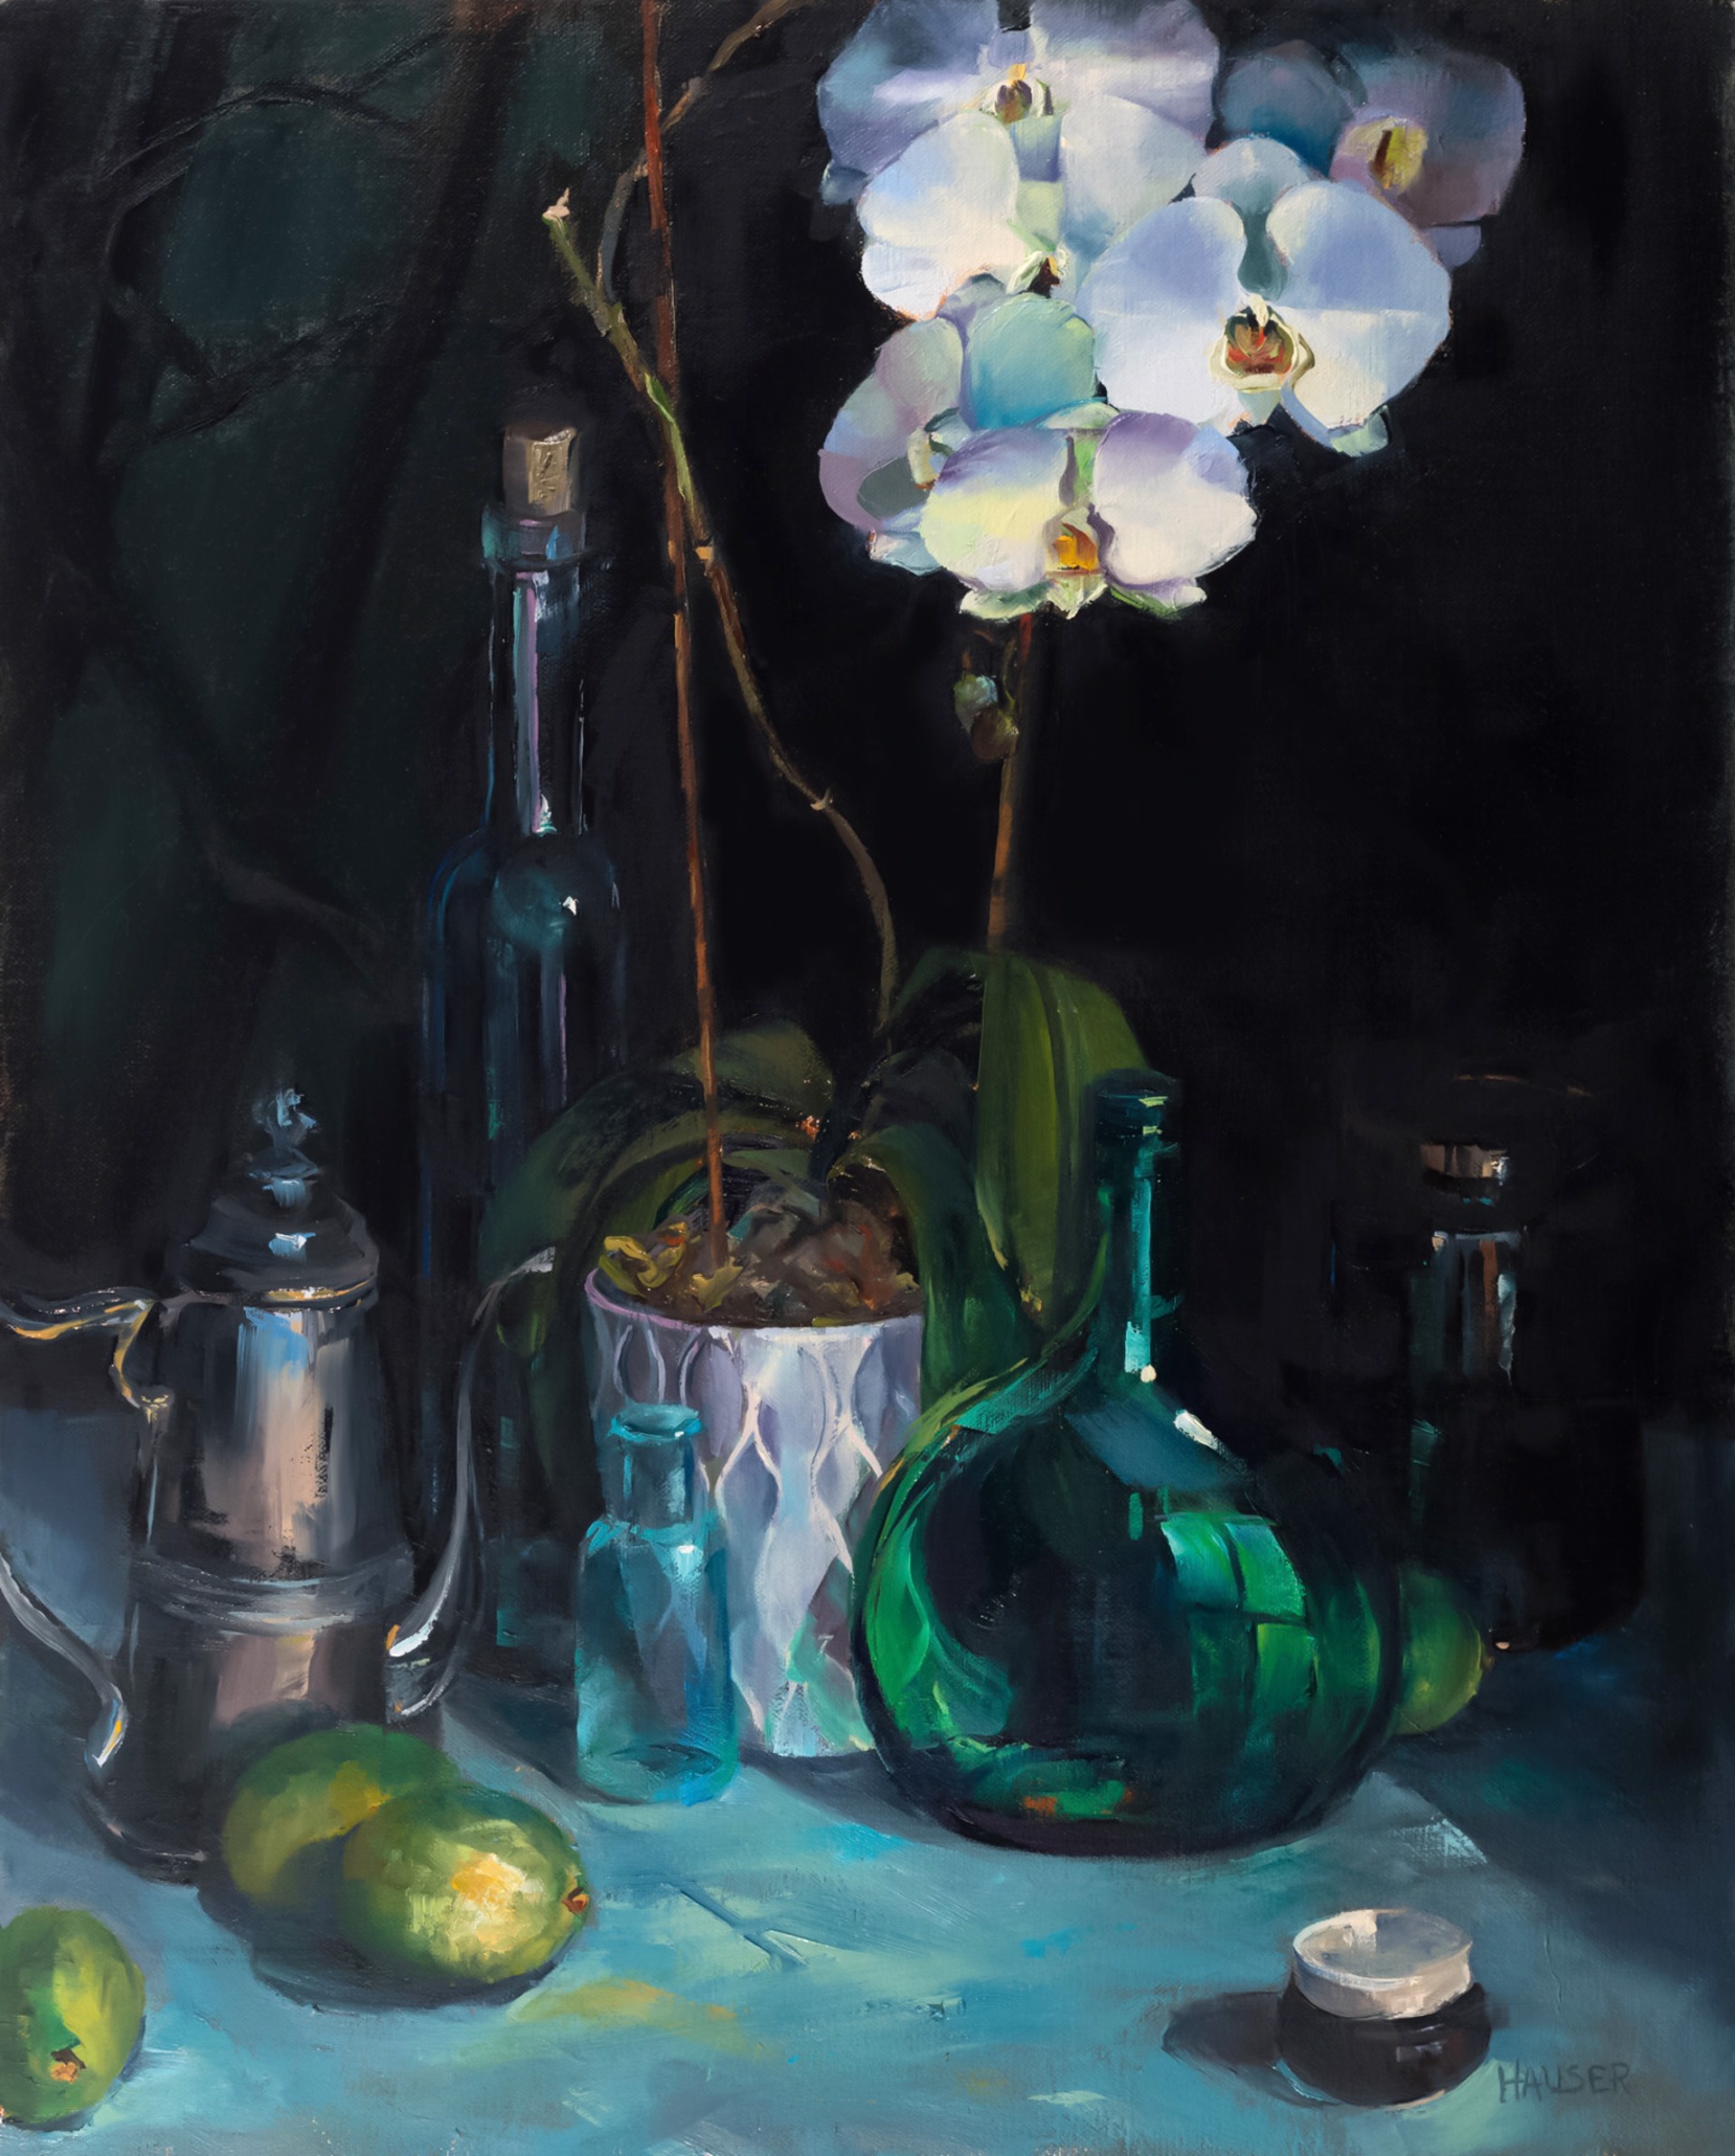 ALICE HAUSER, "Orchids Still"  by Oil Painters of America